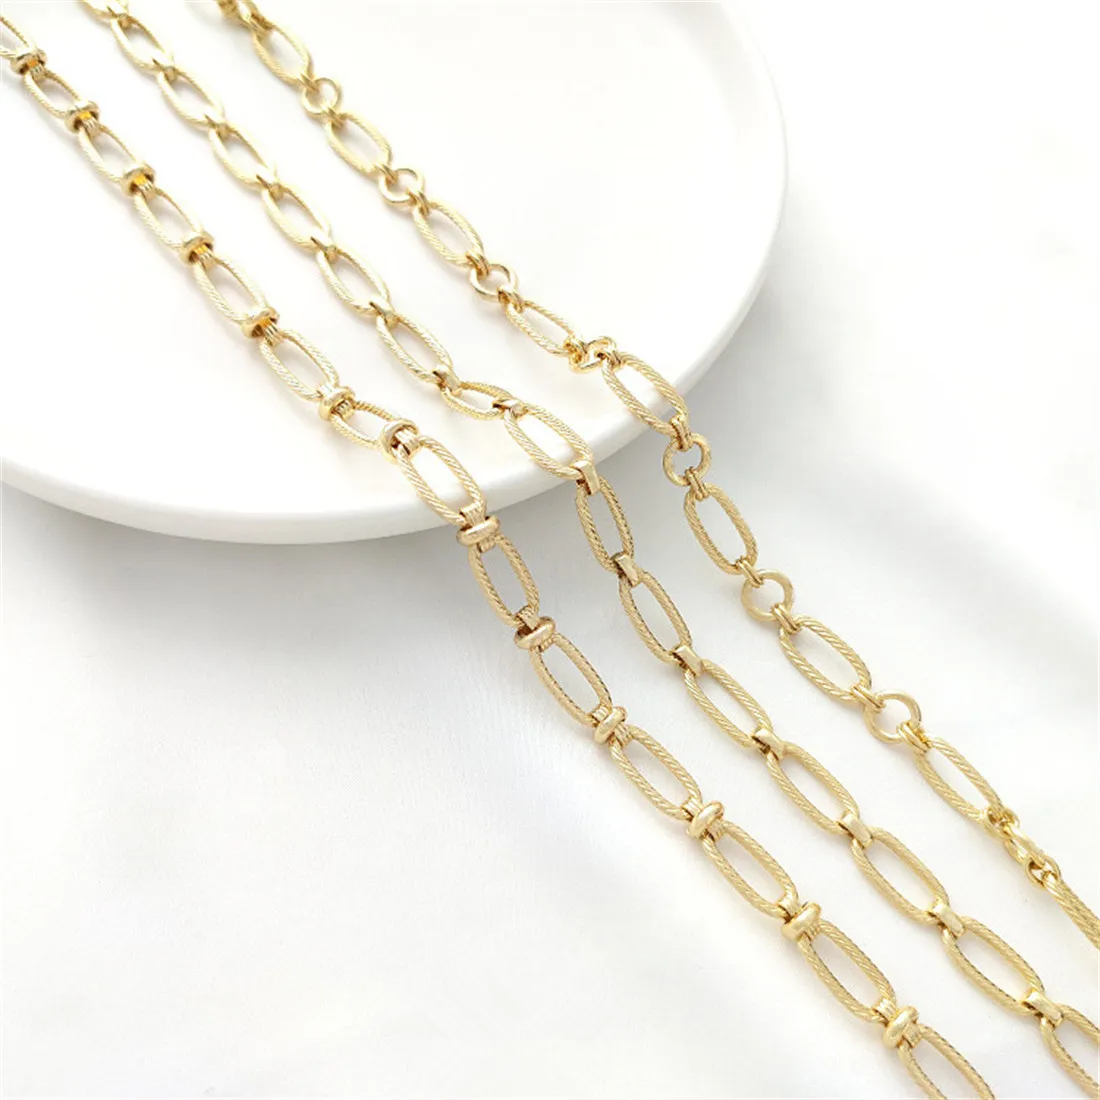 14K Gold Wrapped Oval Fried Dough Twists Chain Manual Long O-ring Chain Diy Bracelet Necklace Jewelry Hand Made Loose Chain B671 200pcs 20x20mm gray adhesive scratch off stickers diy manual label tape hand made scratched stripe card film